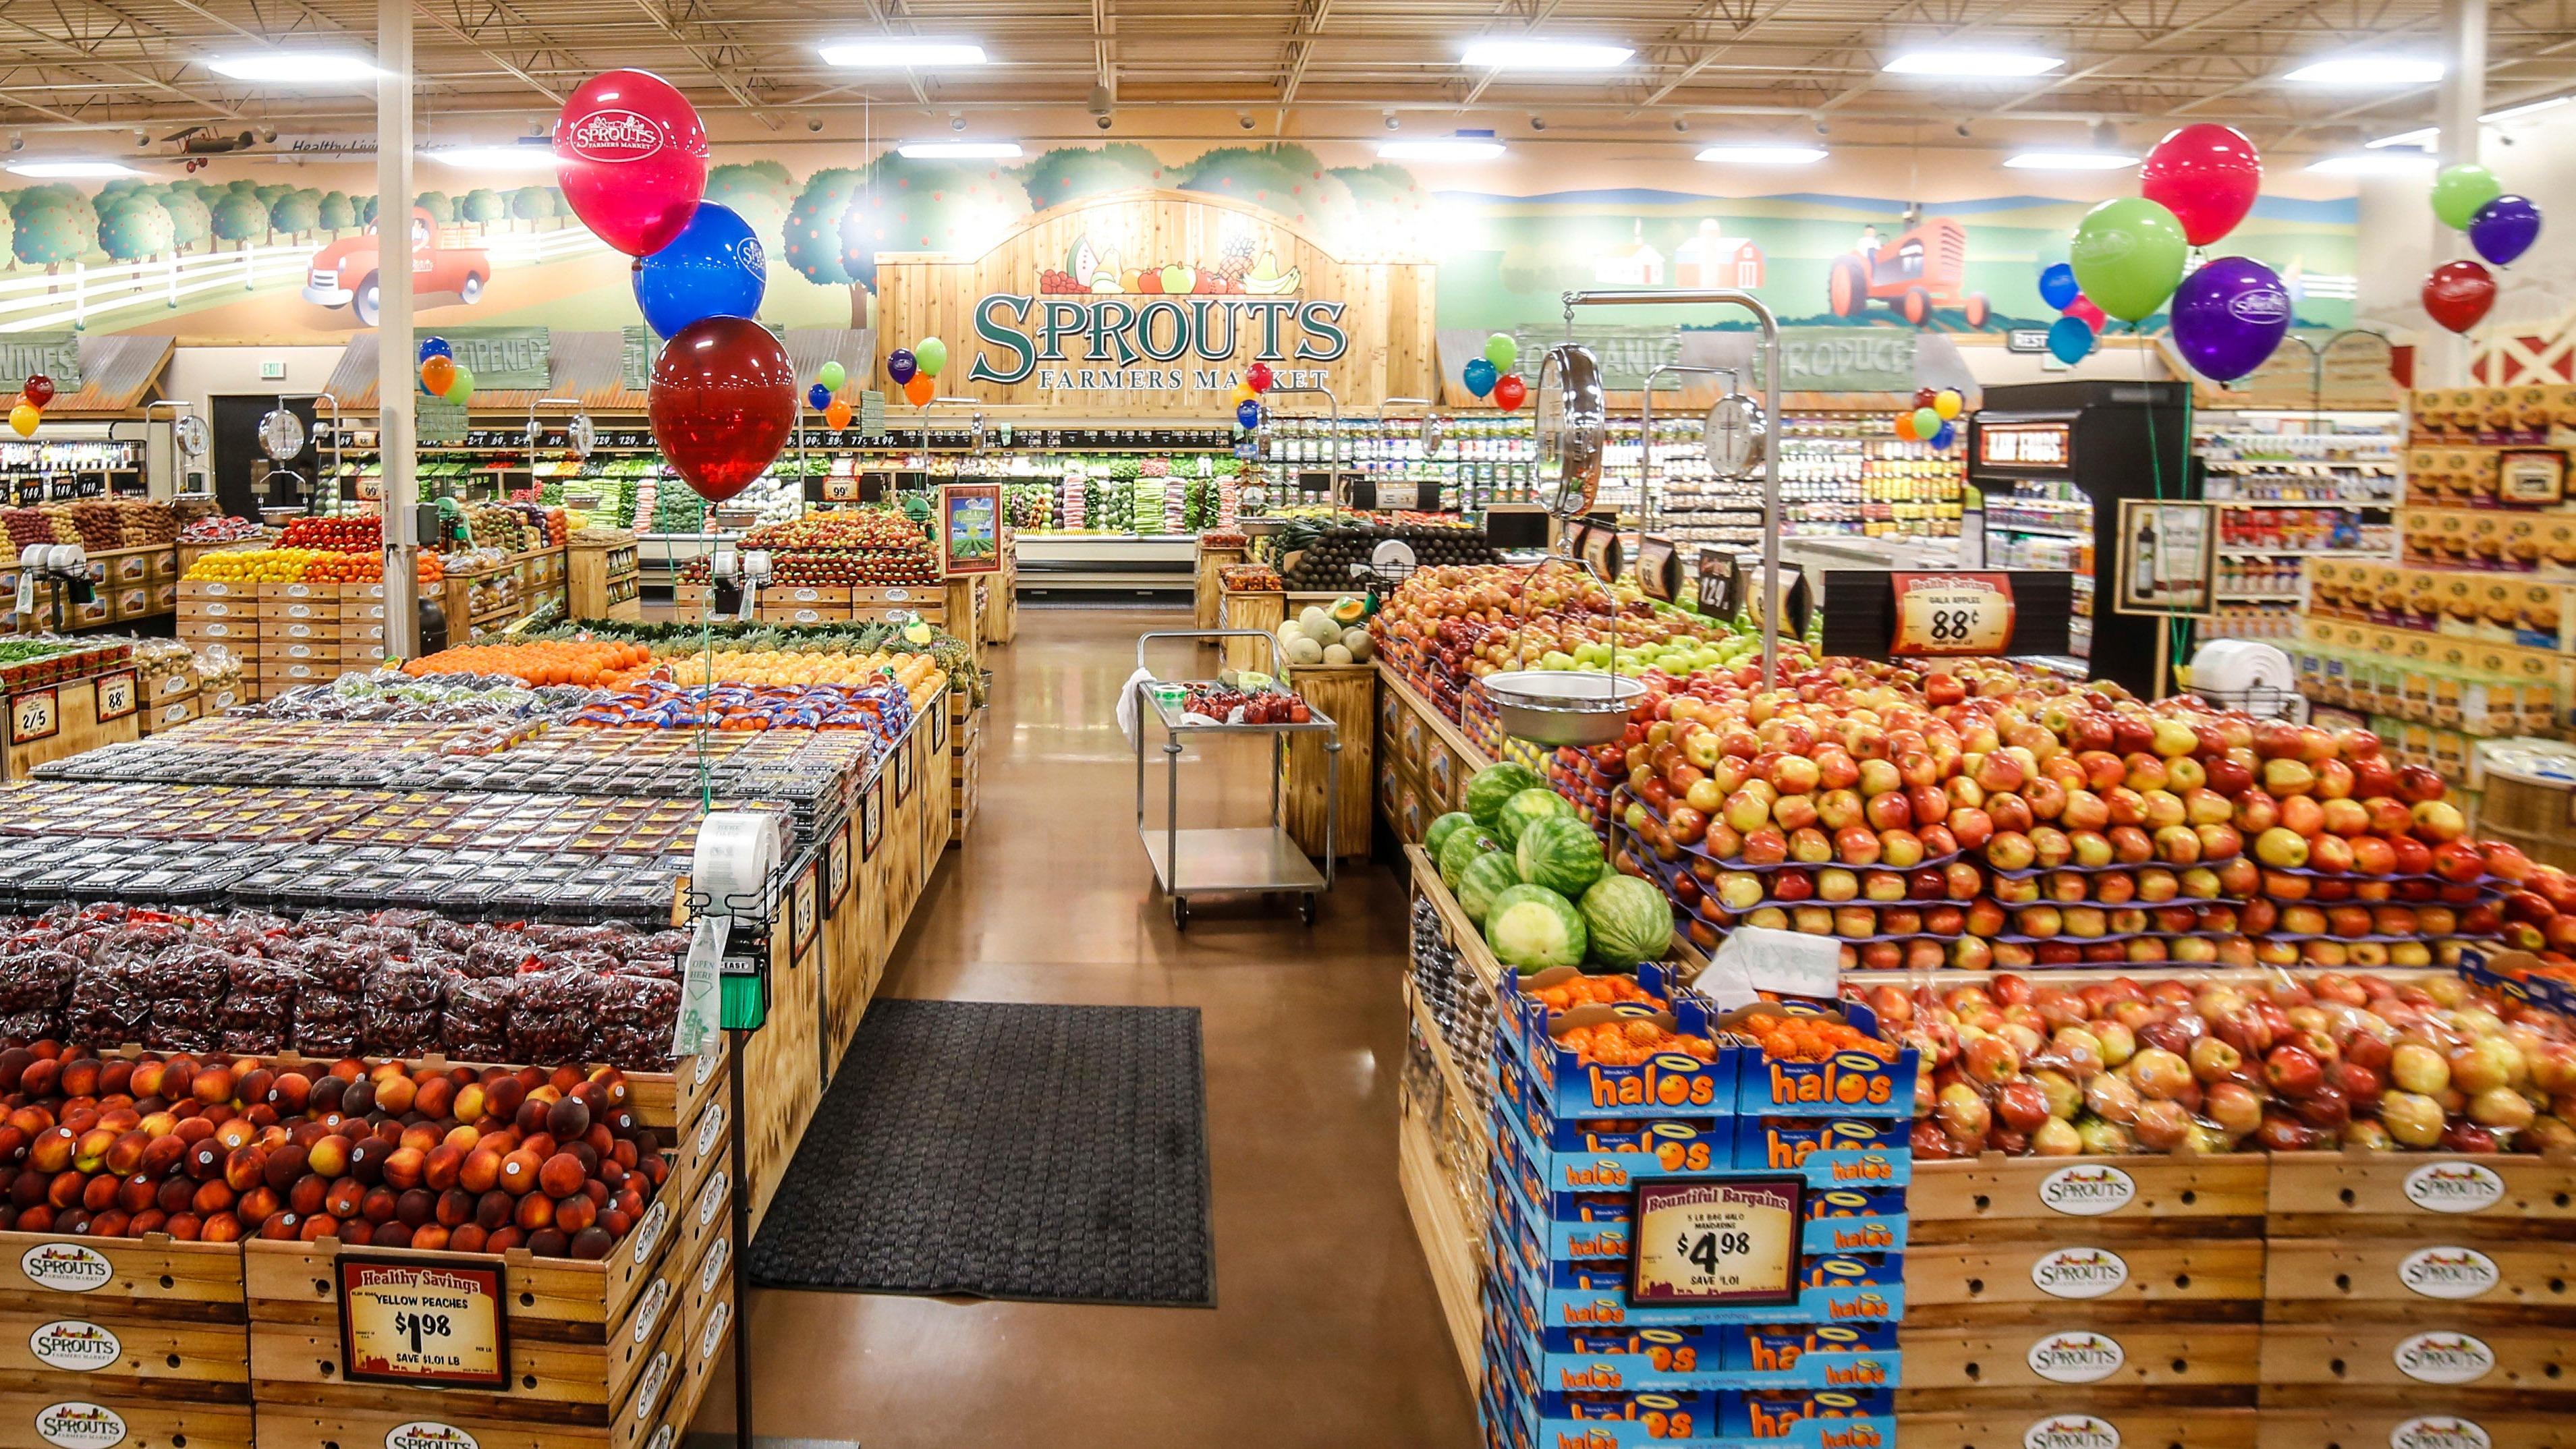 Sprouts Farmers Market Coupons near me in Austin, TX 78745 ...